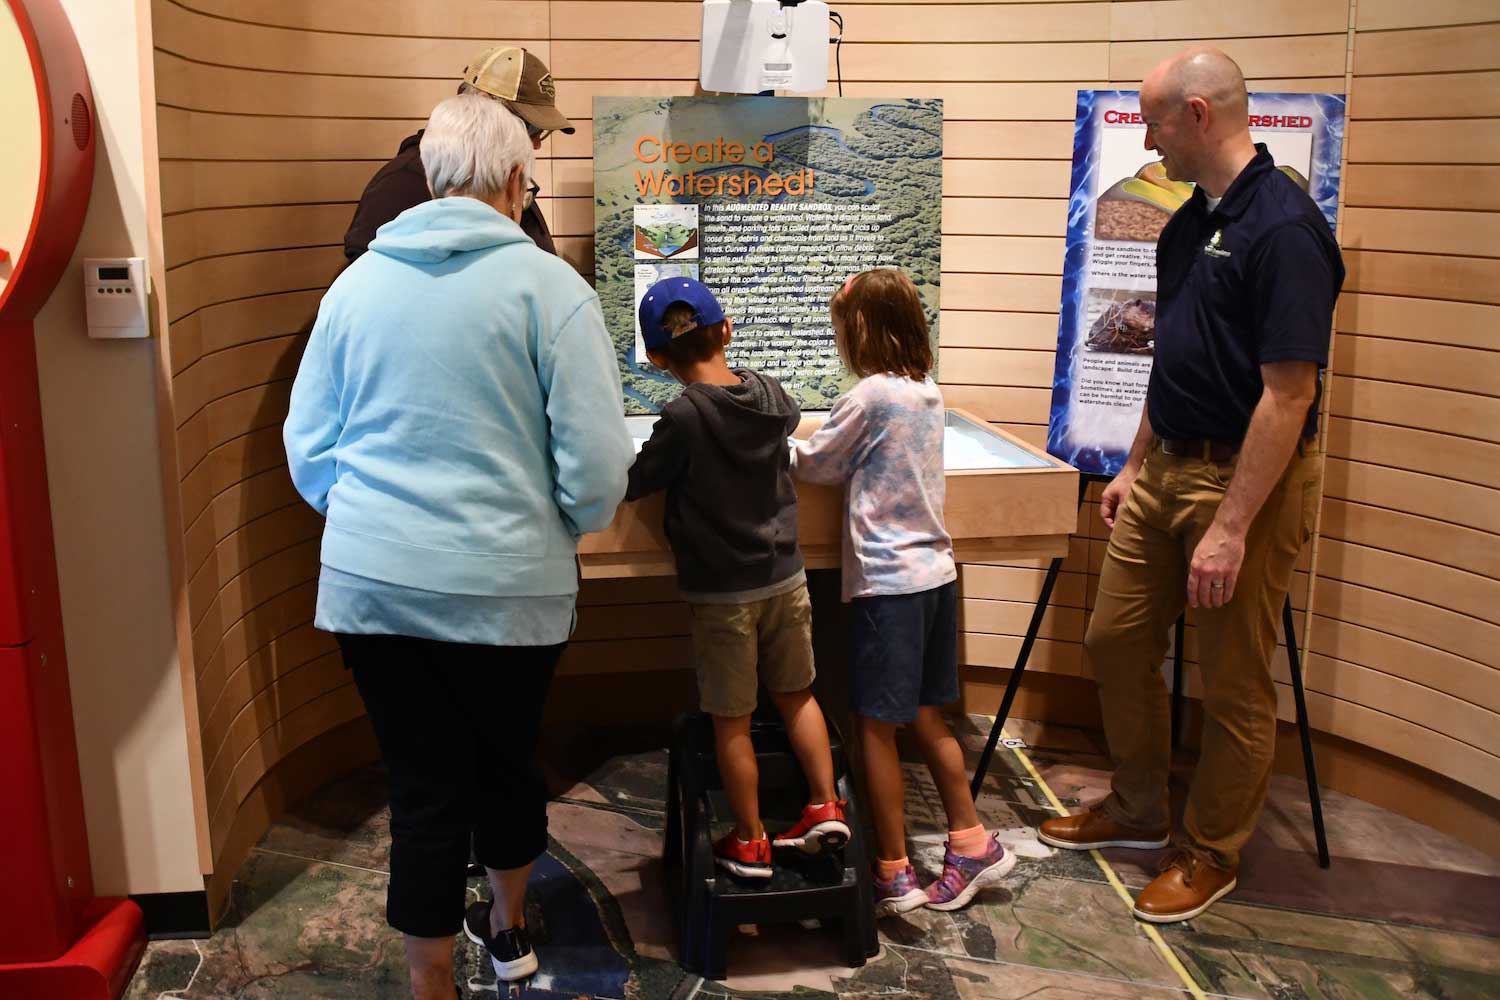 Two children looking at an interactive exhibit while three adults look on.